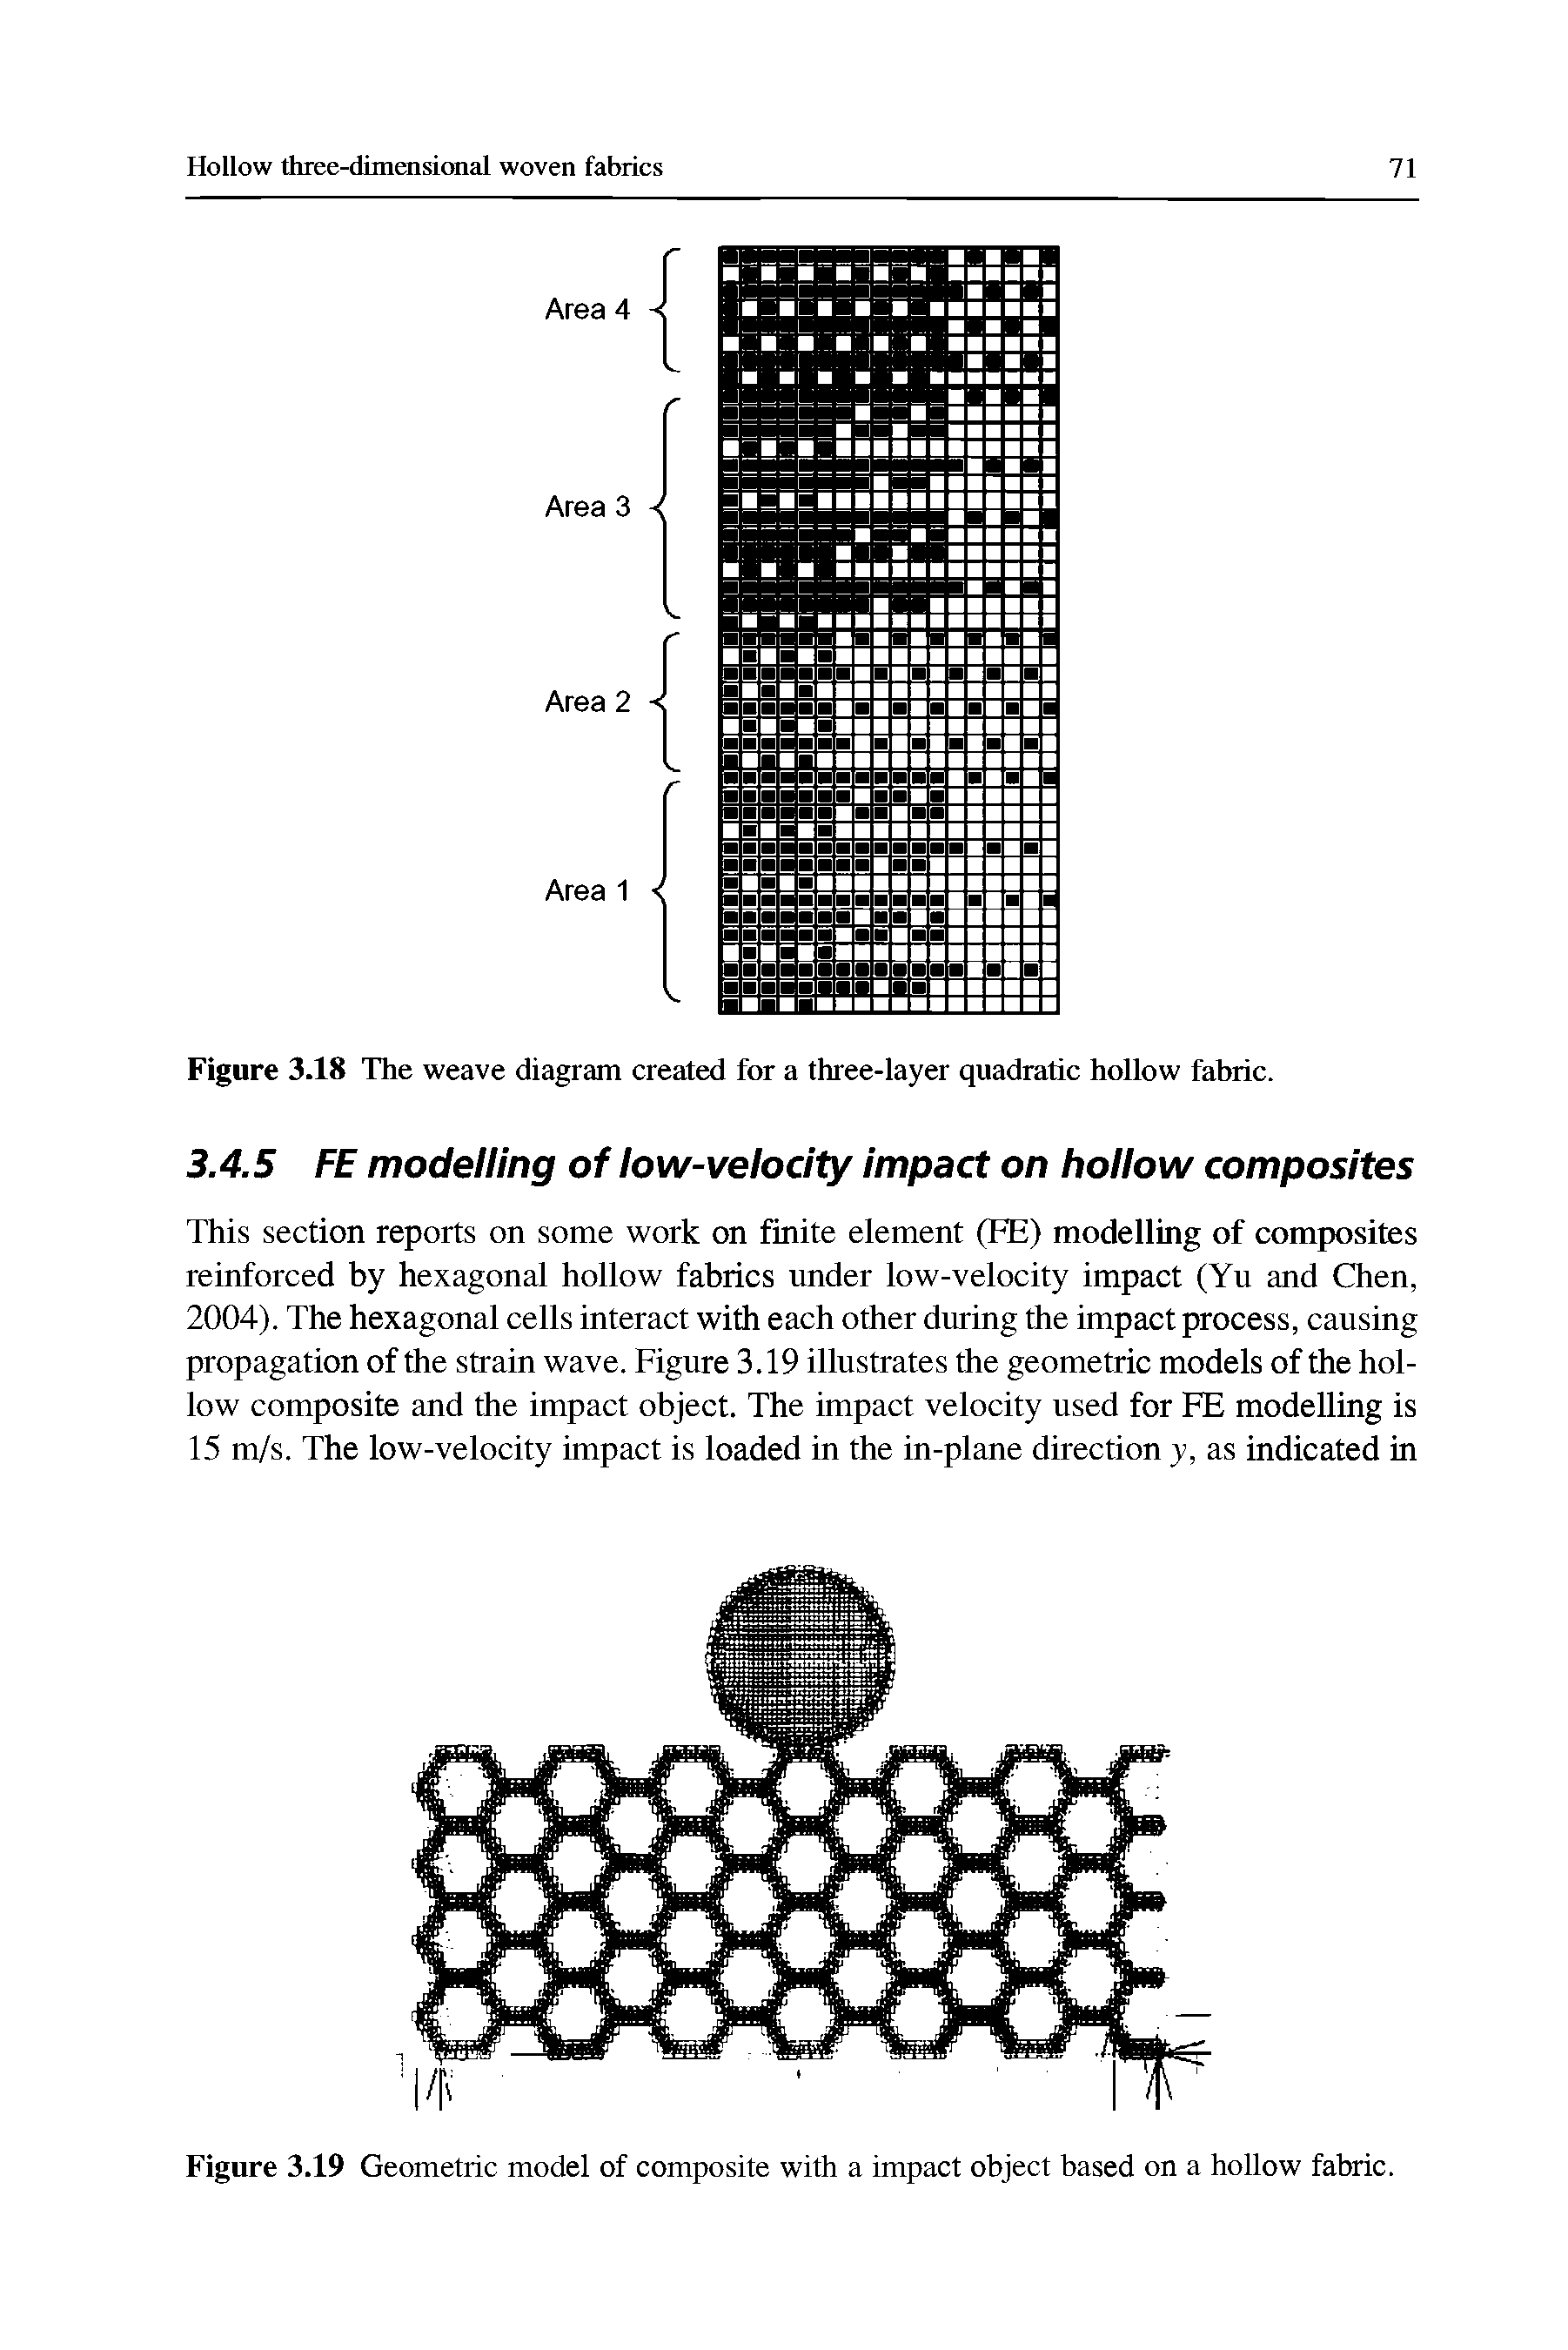 Figure 3.18 The weave diagram created for a three-layer quadratic hollow fabric.